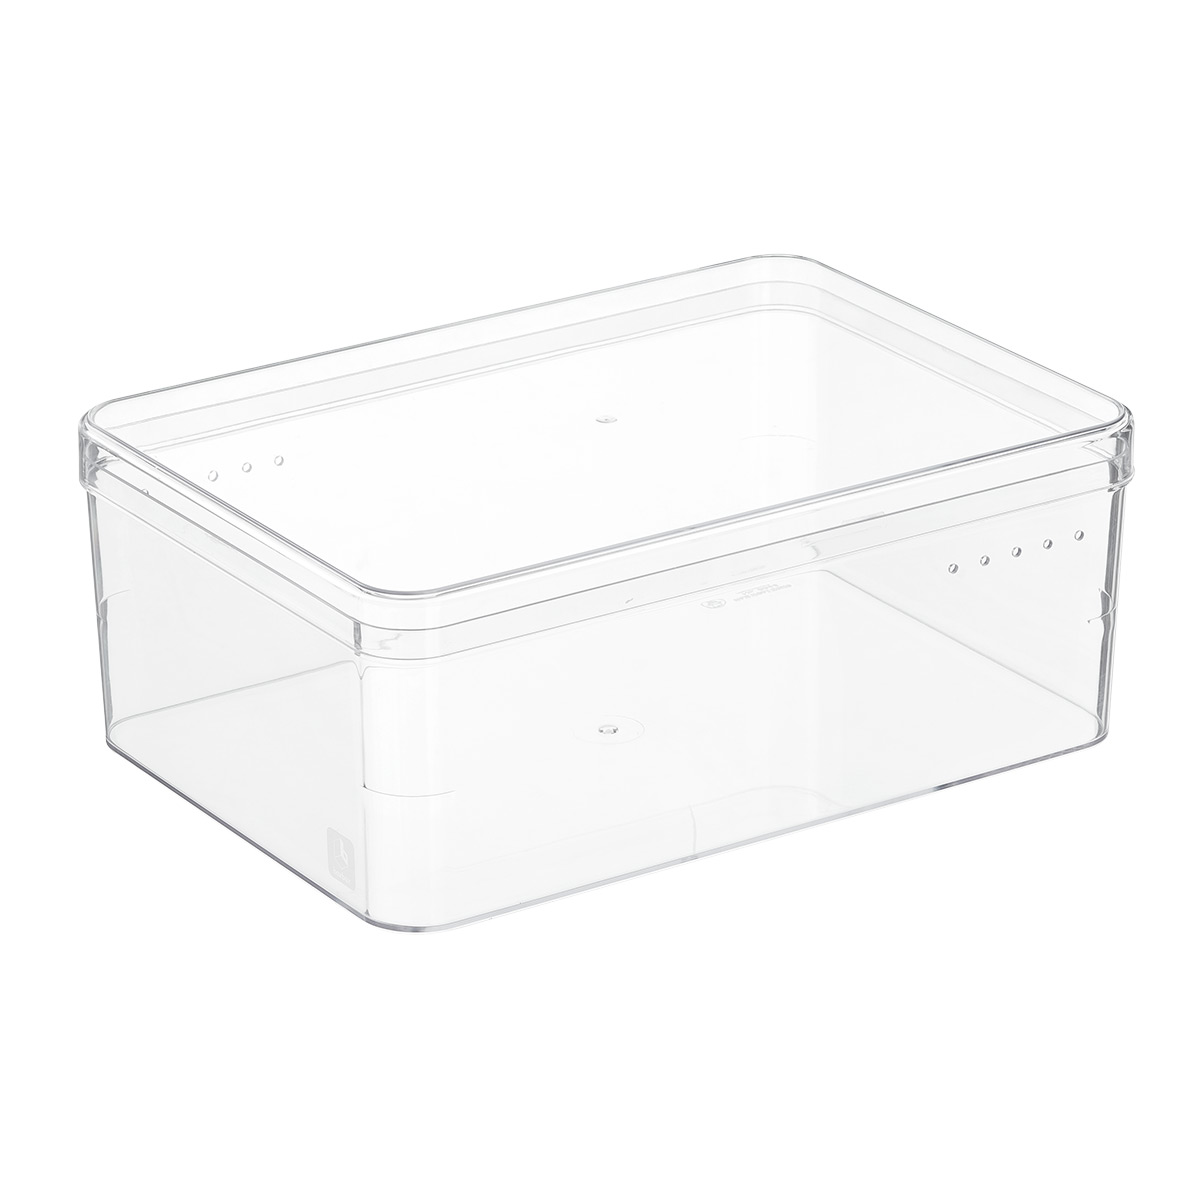 https://images.containerstore.com/catalogimages?sku=10068709